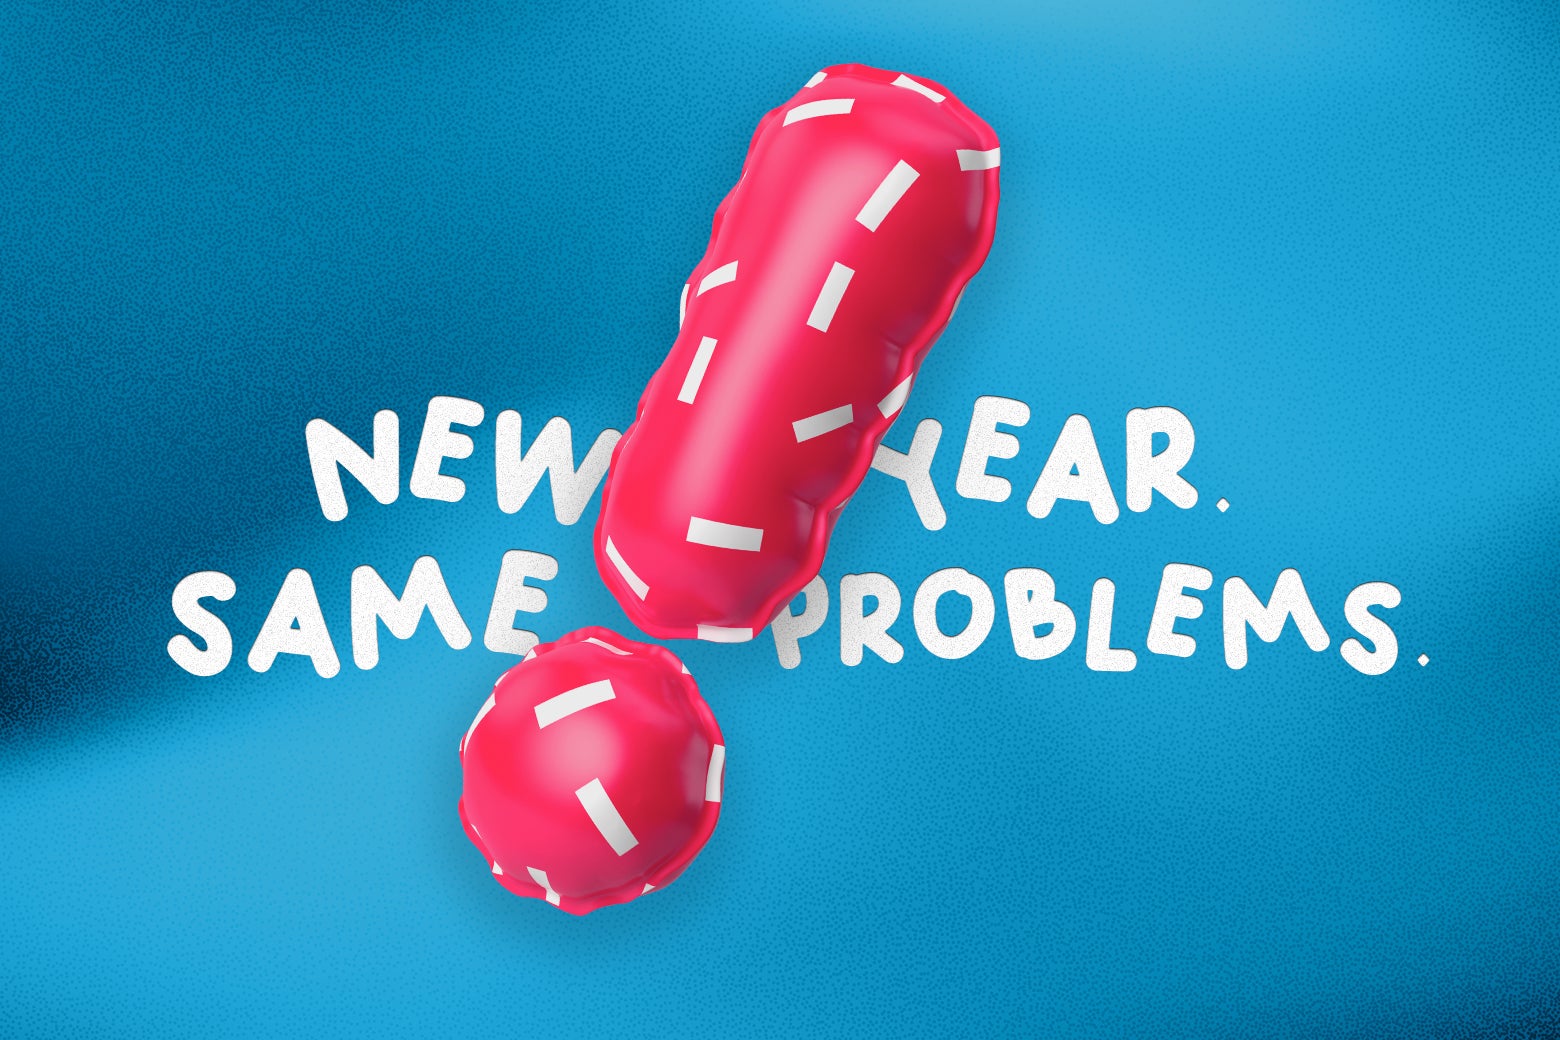 New year, same problems with an exclamation point.